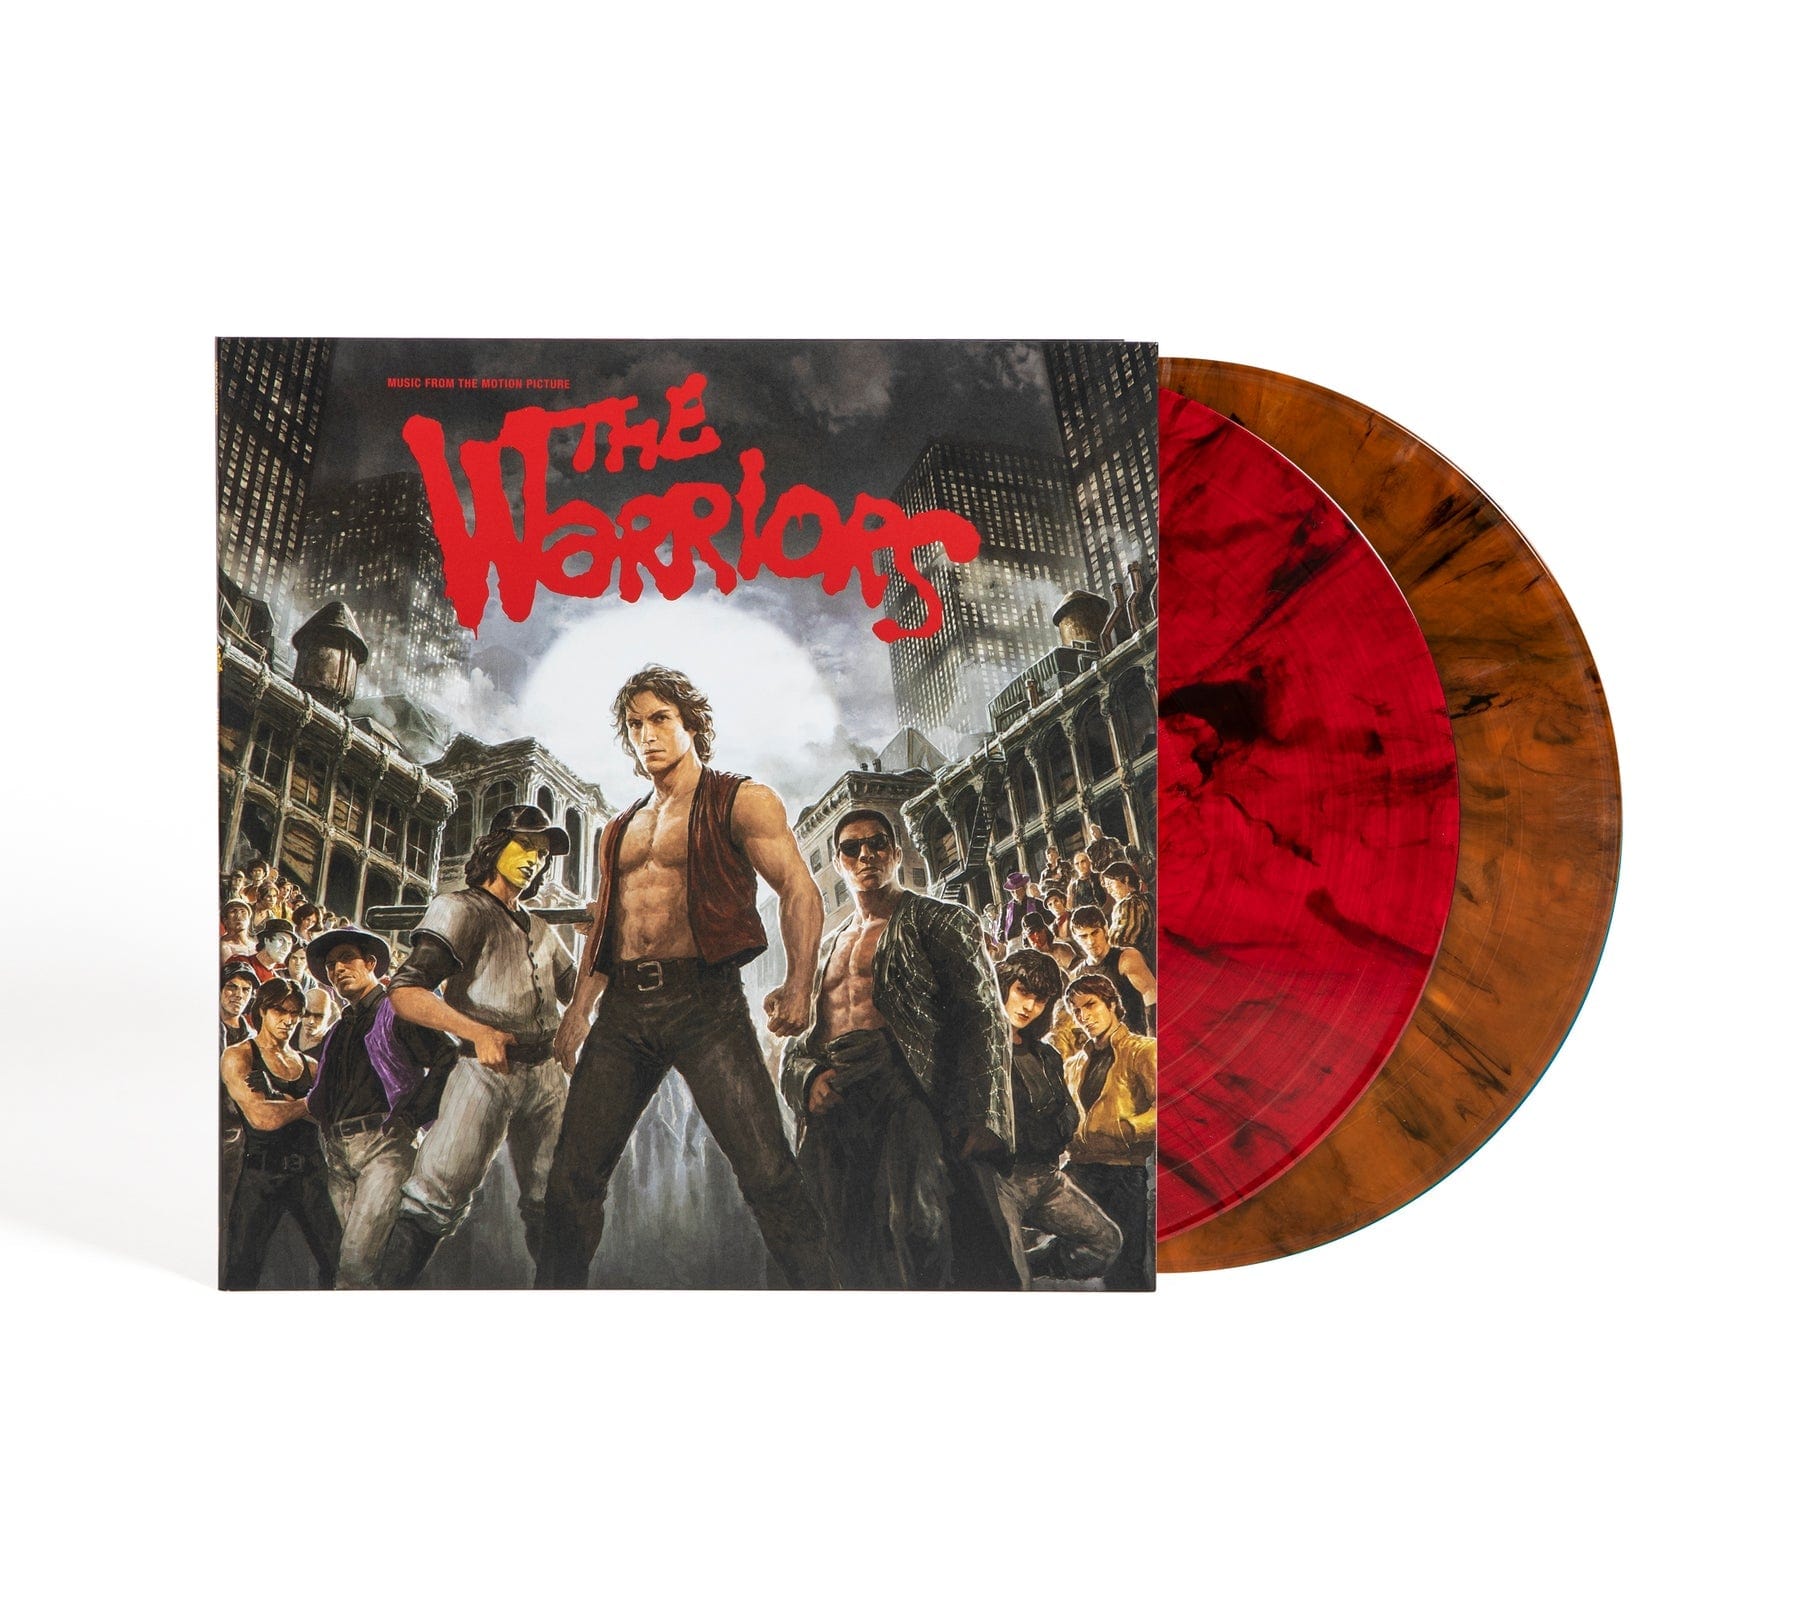 WW010 - Barry DeVorzon - The Warriors (Music From the Original Motion Picture)